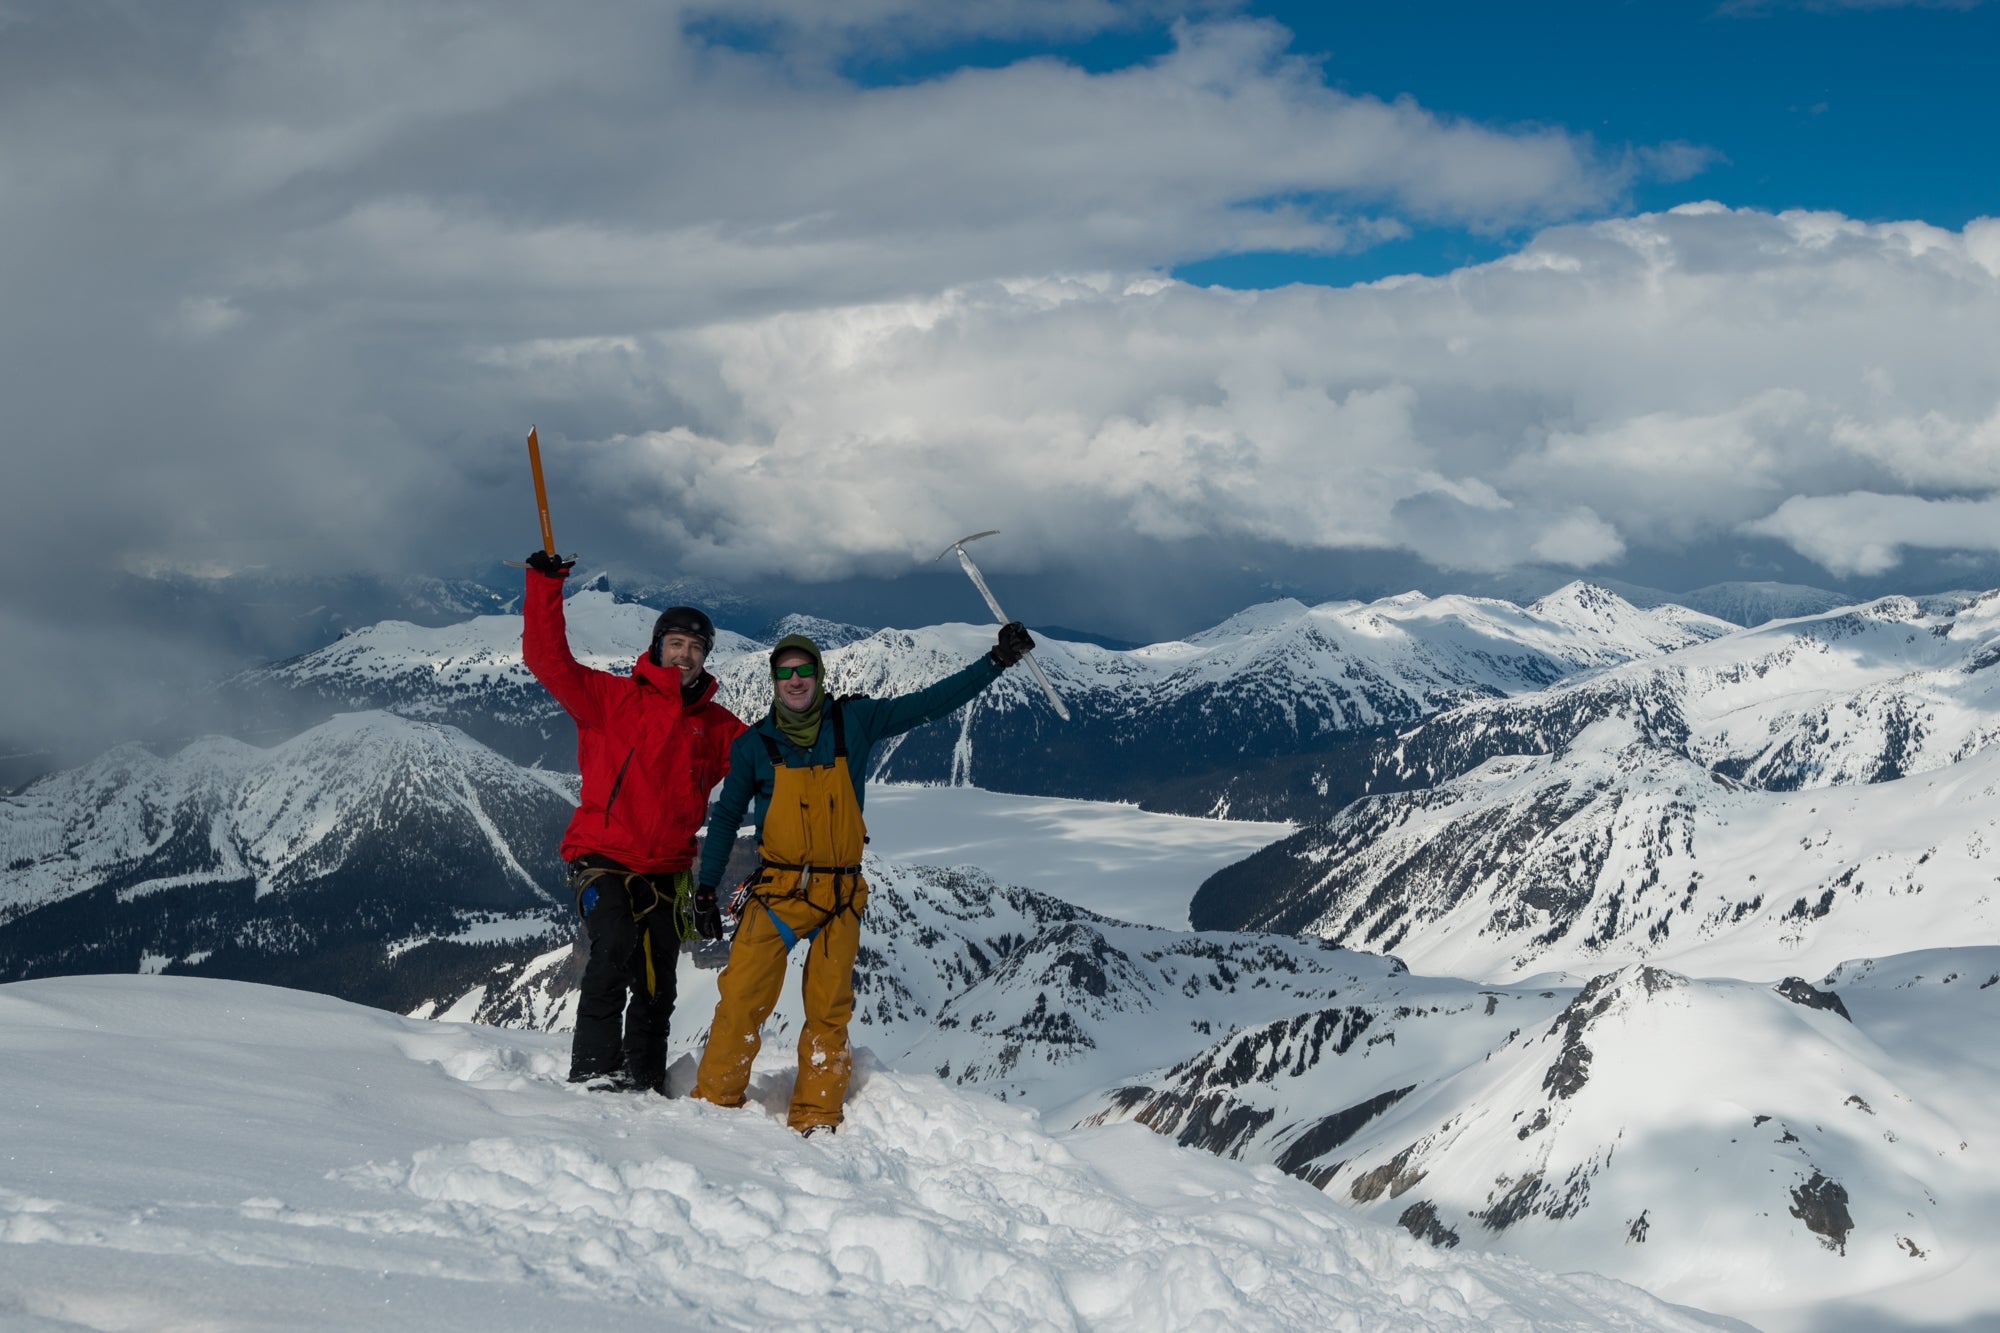 Canadian ski touring and adventure photographer